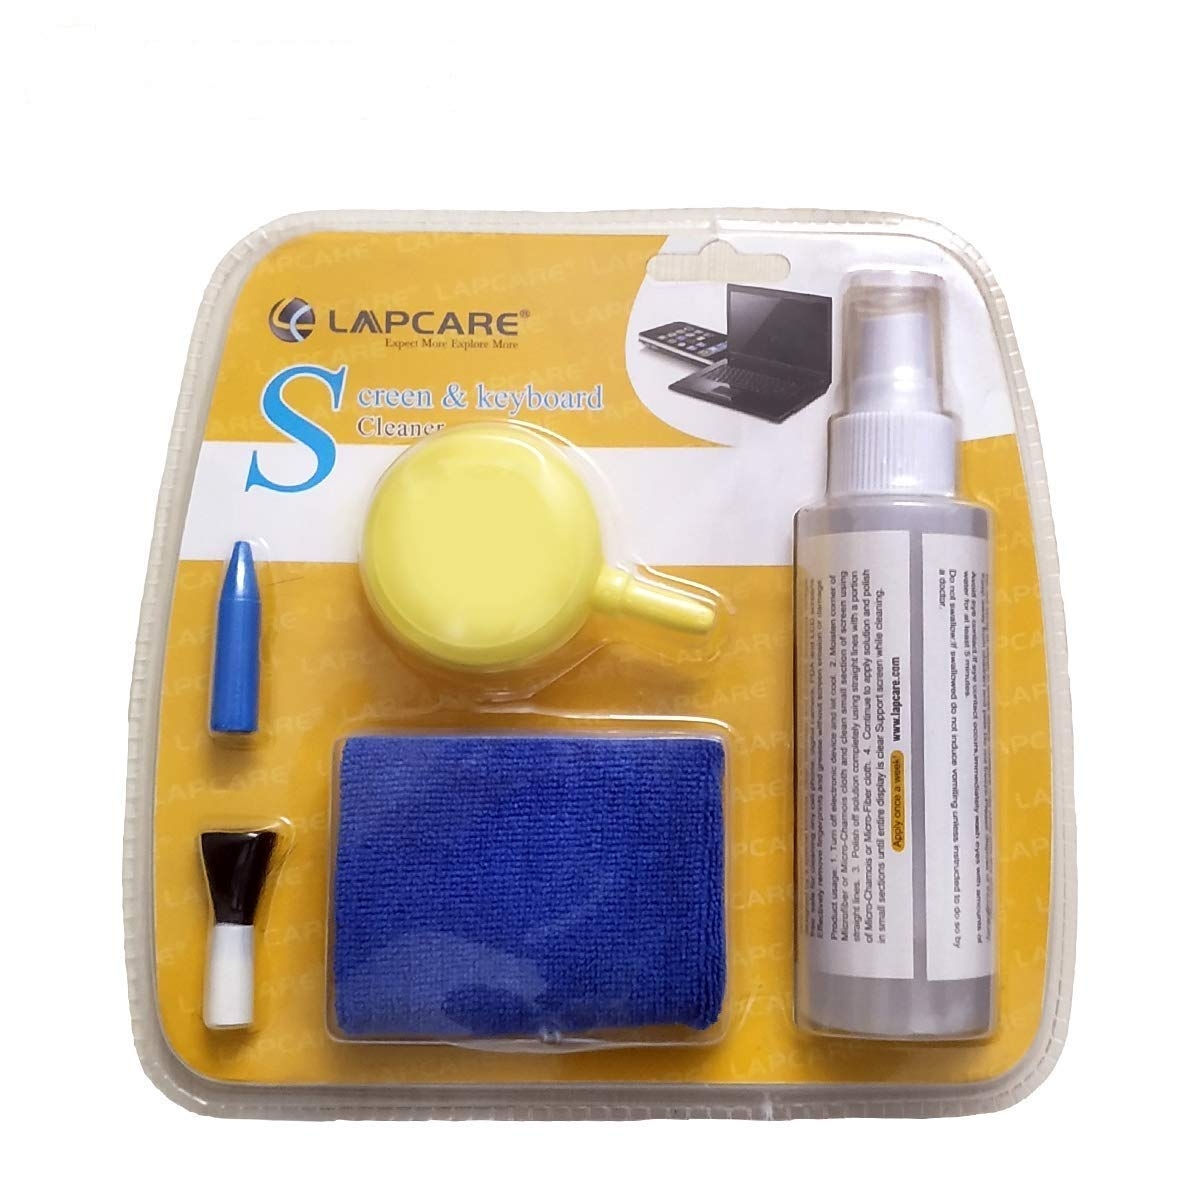 LAPCARE 5in1 Screen Cleaning Kit with Suction Balloon for PC, Laptops, Monitors, Mobiles, LCD, LED, TV/Professional Quality/Prevents Static Electricity, 125ml with Micro Fiber Cloth & Compact Brush